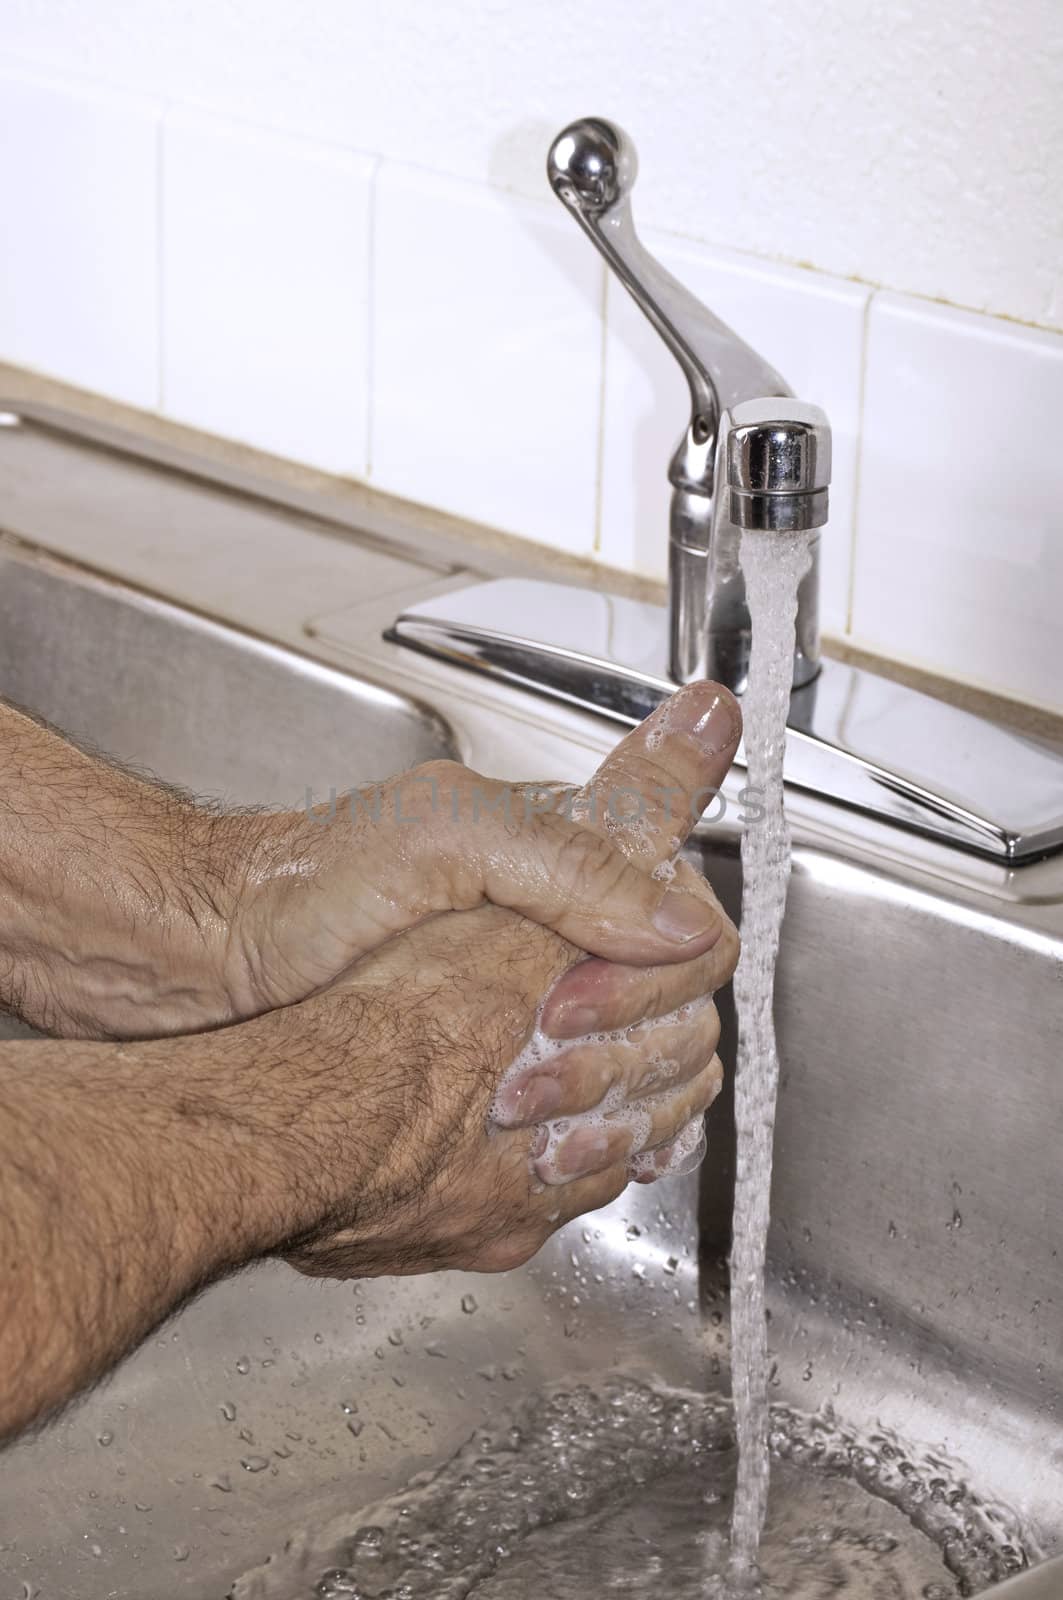 Washing hands to avoid germs from colds and flu